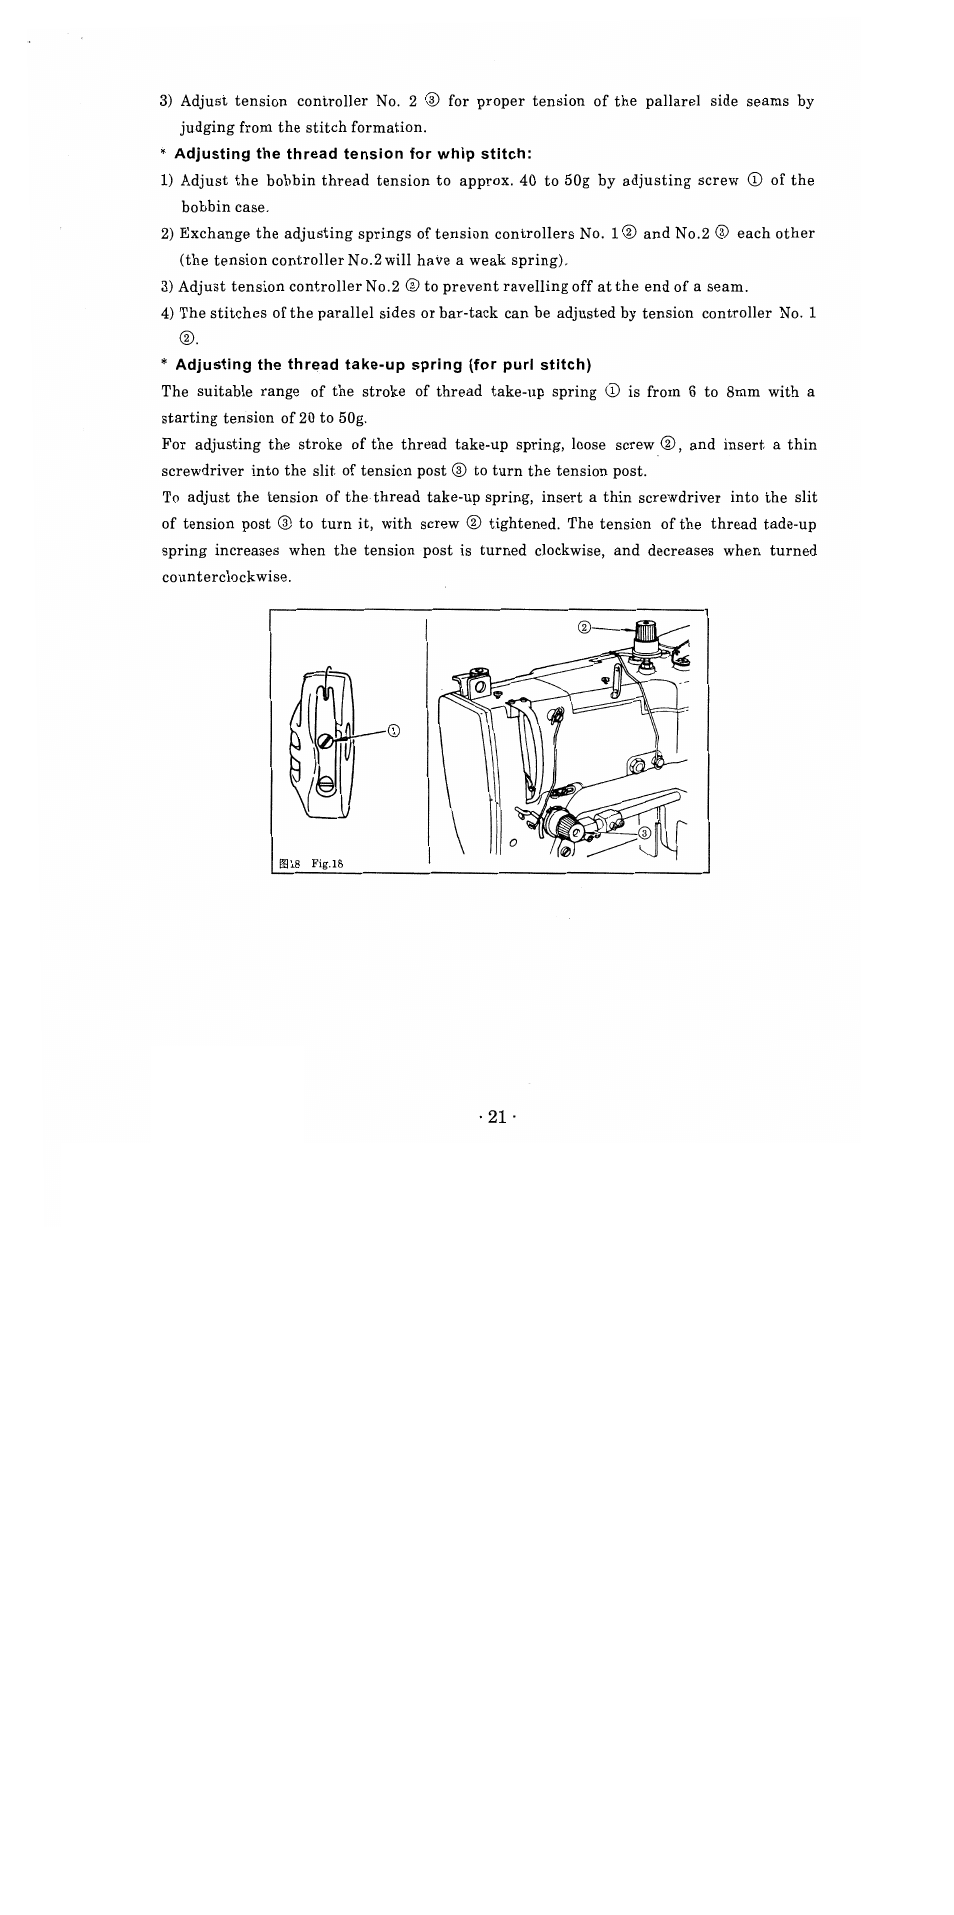 Adjusting the thread tension for whip stitch | SINGER 1371A2 User Manual | Page 24 / 86